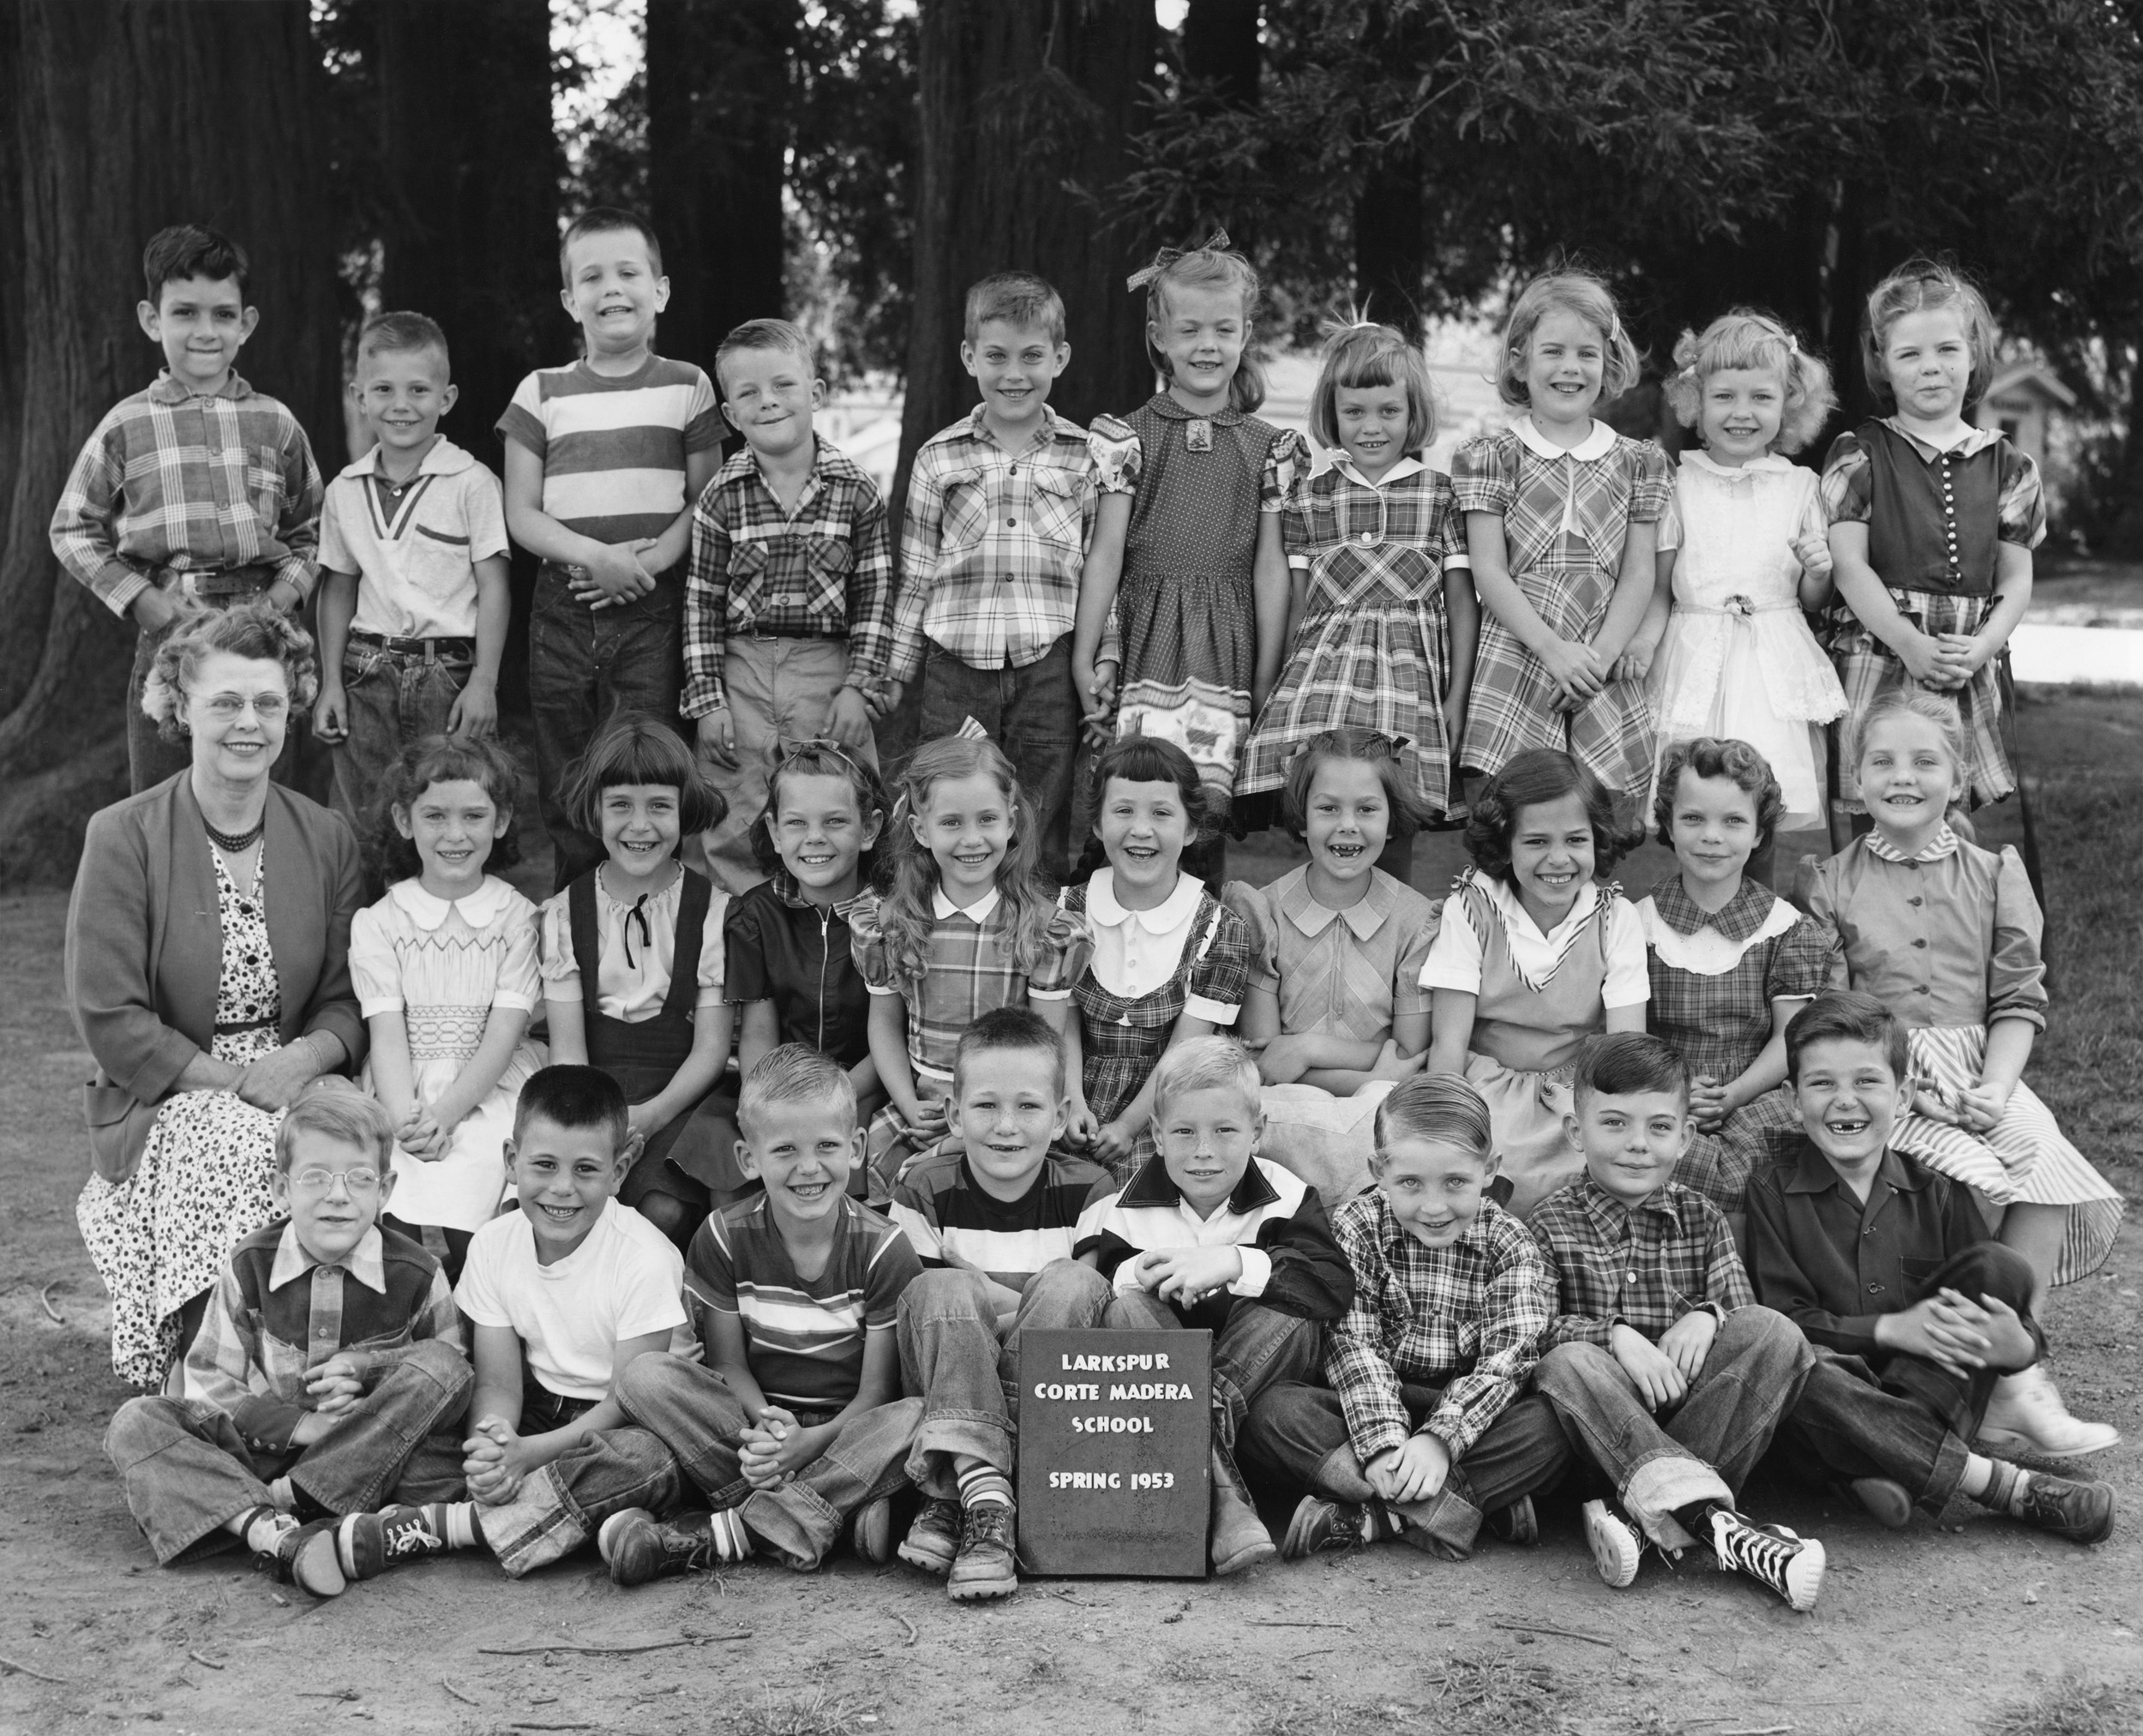 It's seventy years ago in Idyllic Larkspur™, where we find me (bottom left corner) with Bob, David, Bob, Jim, Jim, Margaret, Sandy, Donna, Rae Ann, Roberta, Virginia, Jerry, Buzzy, Fred, Gordy, Frances, Alice, Alice, Sheila, Mrs. Madeline Drew and others whose names I forget. This was taken within a month of losing nearly half our classmates, they having been siphoned off to the district's brand new school in neighboring "Twin City," almost-as-Idyllic Corte Madera. And that one was already overcrowded, for which first-wave baby boomers such as we must shoulder the blame. As for me, good old L-CM was just four blocks from our home at 9 Arch Street, and I continued to walk the round-trip every school day, rain or shine, until I graduated 8th grade. View full size.